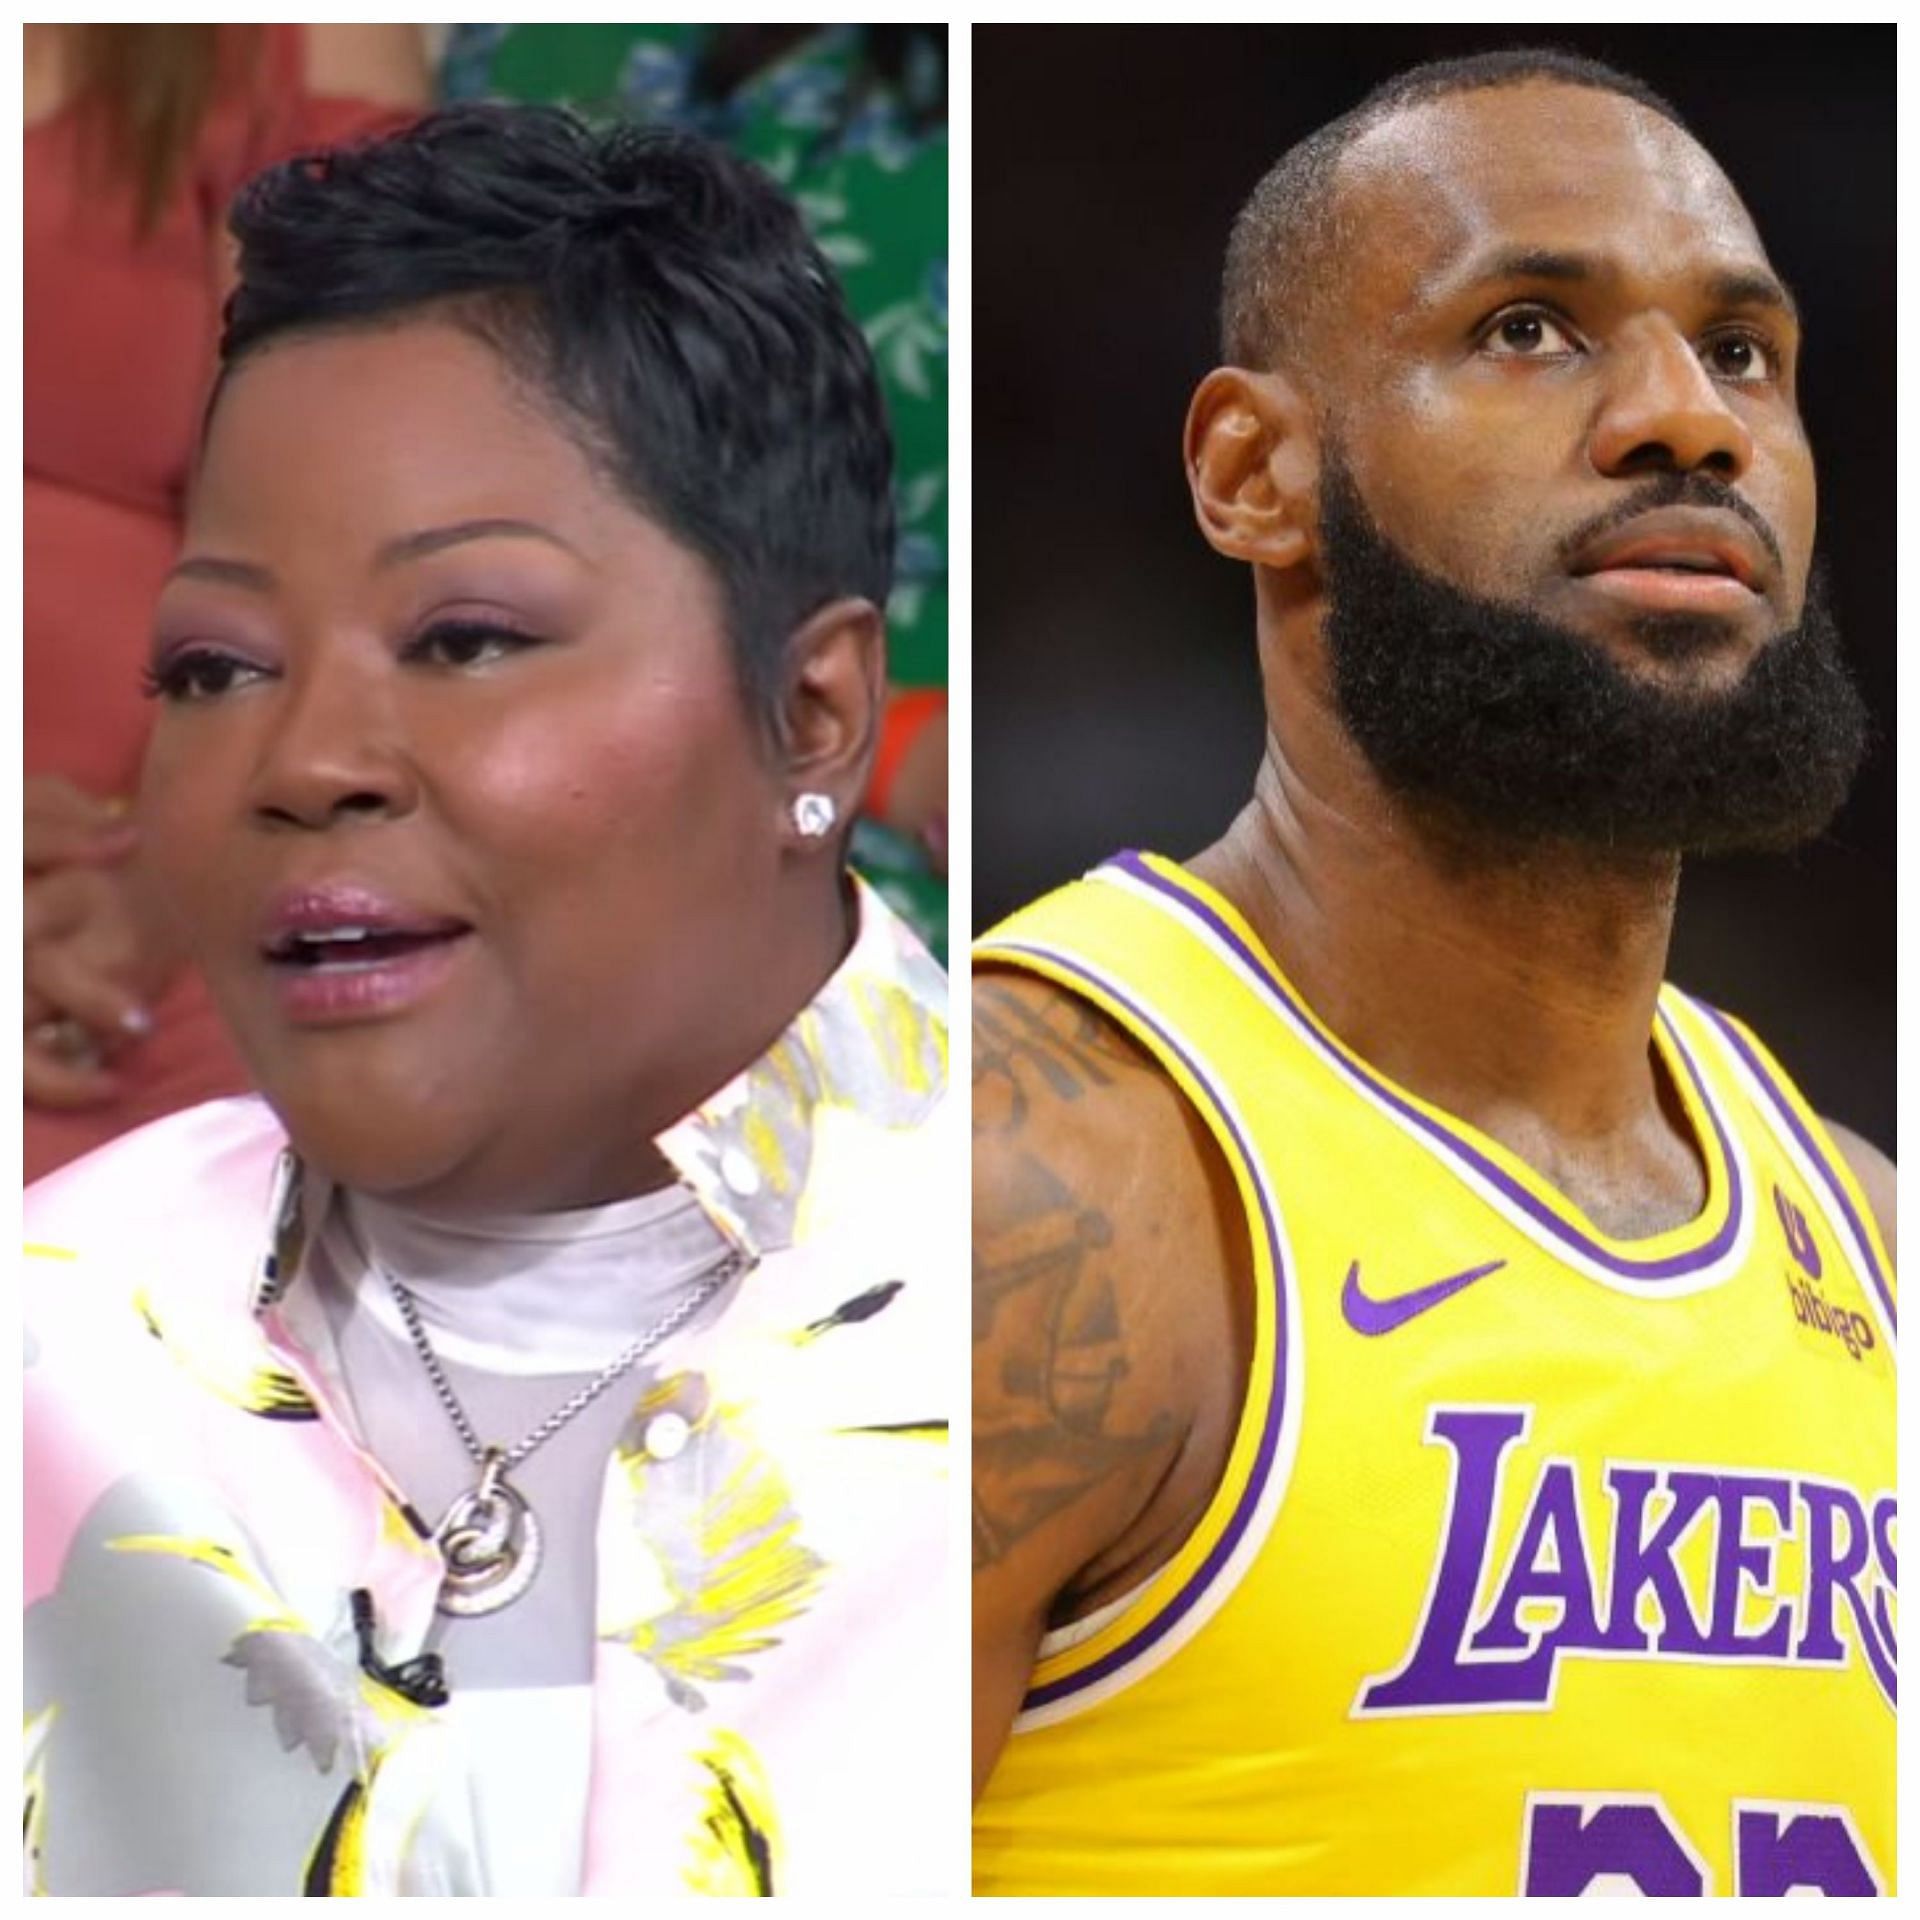 Watch: LeBron James shows love to Wanda Durant after edging out her son, Kevin Durant in clash of titans